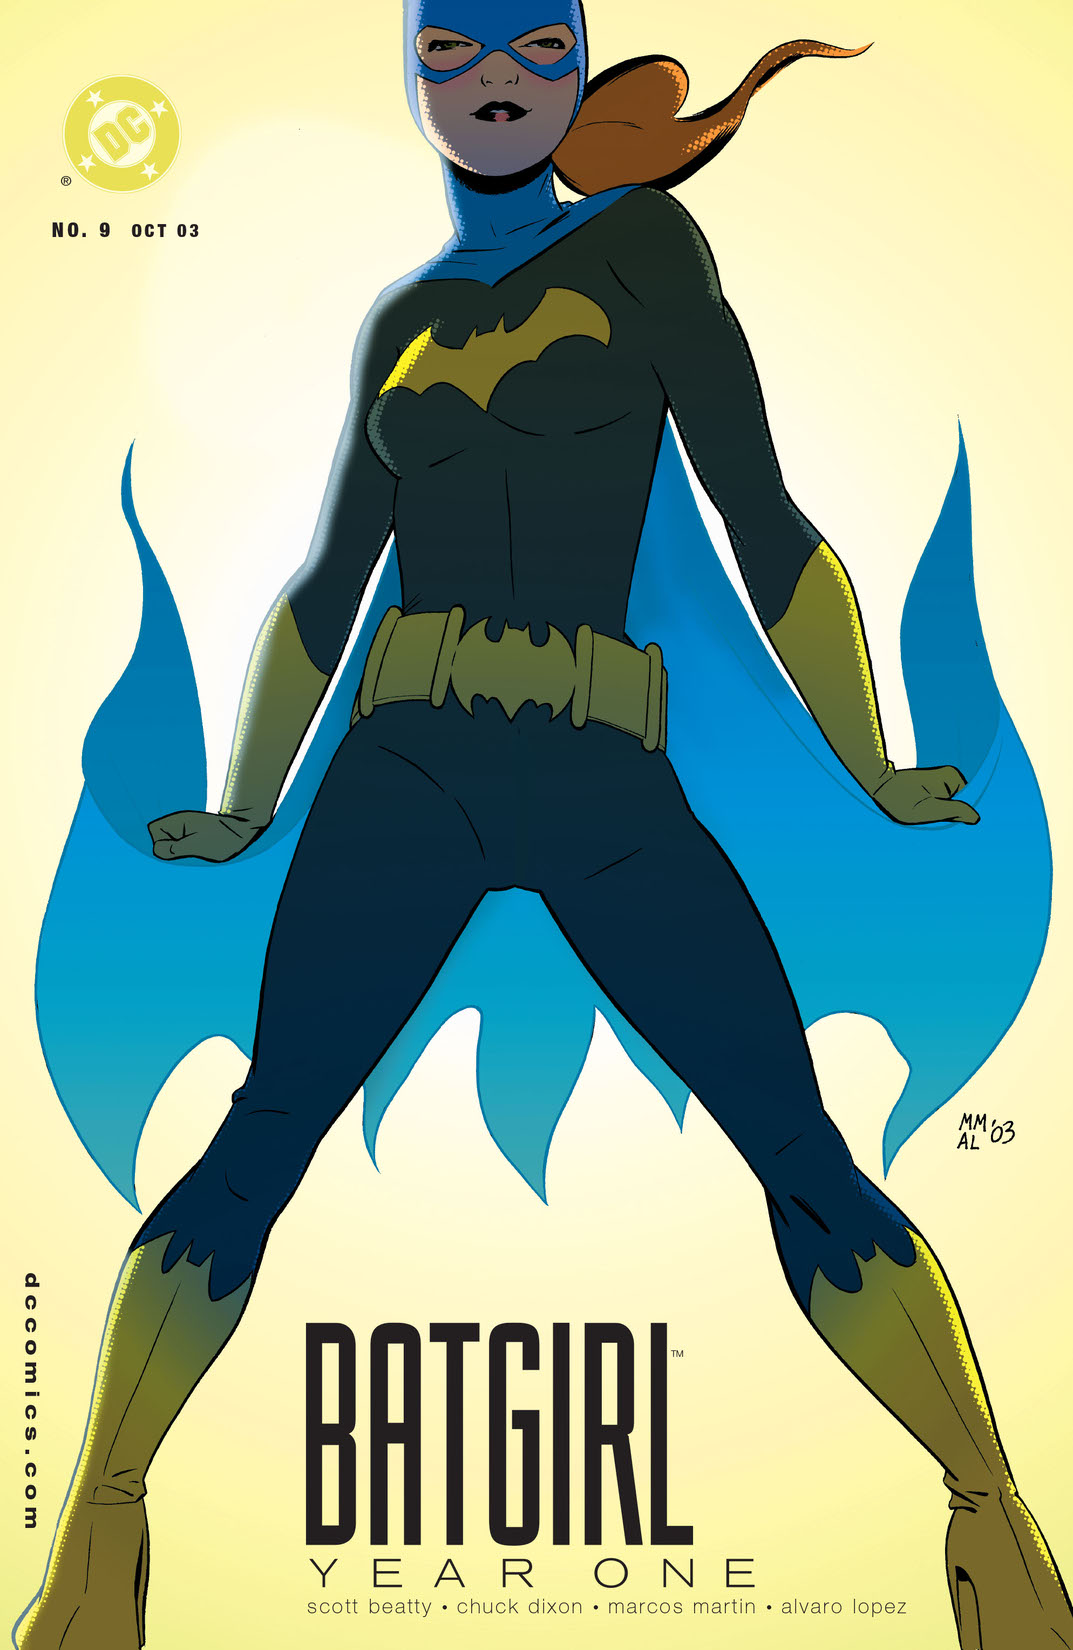 Batgirl Year One #9 preview images